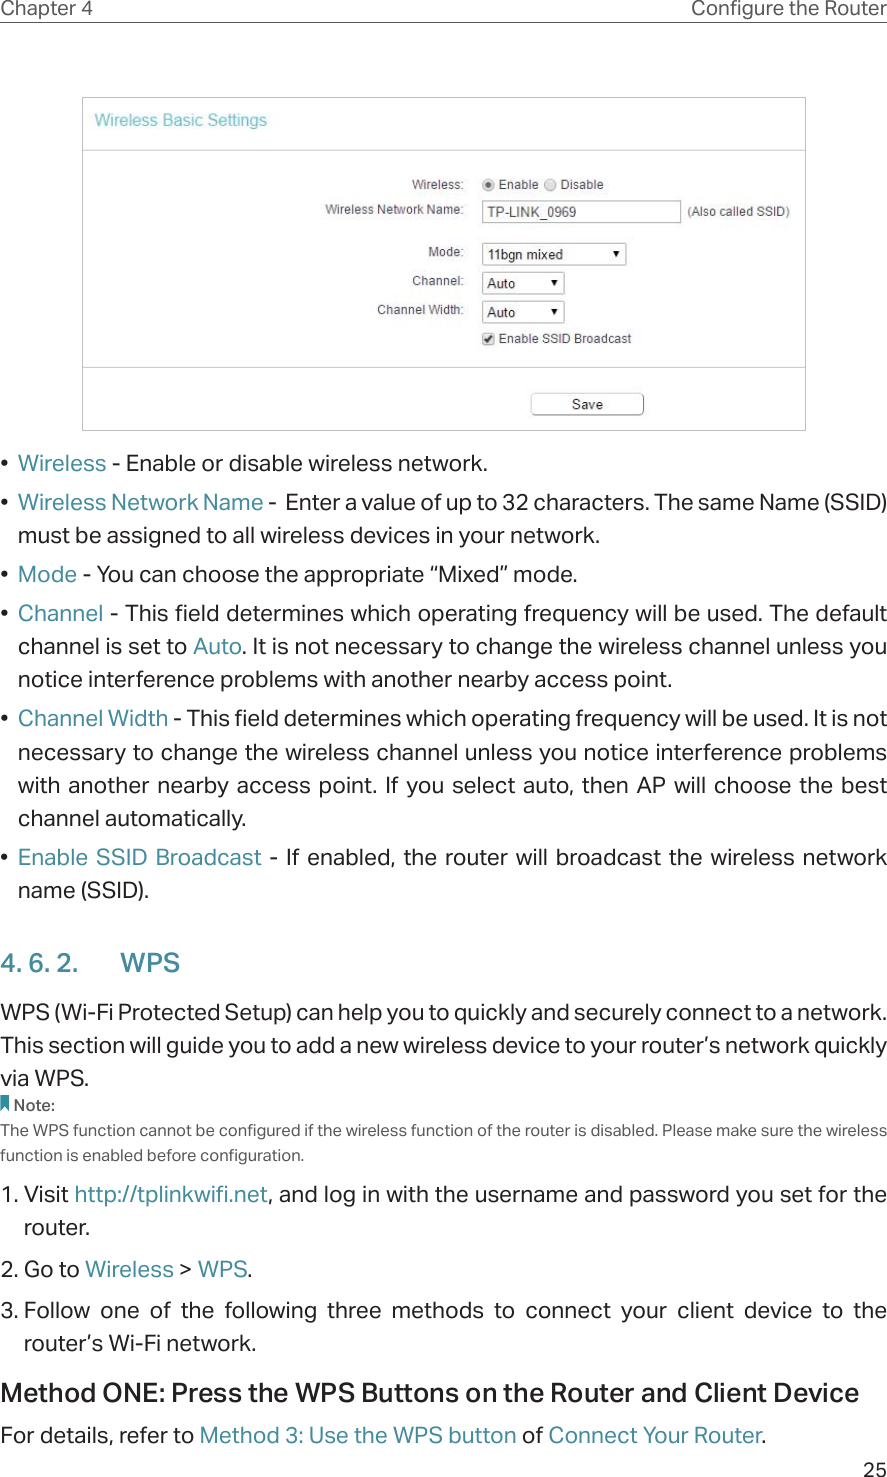 25Chapter 4 &amp;RQƮJXUHWKH5RXWHU•  Wireless - Enable or disable wireless network.•  Wireless Network Name -  Enter a value of up to 32 characters. The same Name (SSID) must be assigned to all wireless devices in your network.•  Mode - You can choose the appropriate “Mixed” mode.•  Channel - This field determines which operating frequency will be used. The default channel is set to Auto. It is not necessary to change the wireless channel unless you notice interference problems with another nearby access point.•  Channel Width - This field determines which operating frequency will be used. It is not necessary to change the wireless channel unless you notice interference problems with another nearby access point. If you select auto, then AP will choose the best channel automatically.•  Enable SSID Broadcast - If enabled, the router will broadcast the wireless network name (SSID).4. 6. 2.  WPSWPS (Wi-Fi Protected Setup) can help you to quickly and securely connect to a network. This section will guide you to add a new wireless device to your router’s network quickly via WPS.Note:The WPS function cannot be configured if the wireless function of the router is disabled. Please make sure the wireless function is enabled before configuration.1. Visit http://tplinkwifi.net, and log in with the username and password you set for the router.2. Go to Wireless &gt; WPS. 3. Follow one of the following three methods to connect your client device to the router’s Wi-Fi network.Method ONE: Press the WPS Buttons on the Router and Client DeviceFor details, refer to Method 3: Use the WPS button of Connect Your Router.